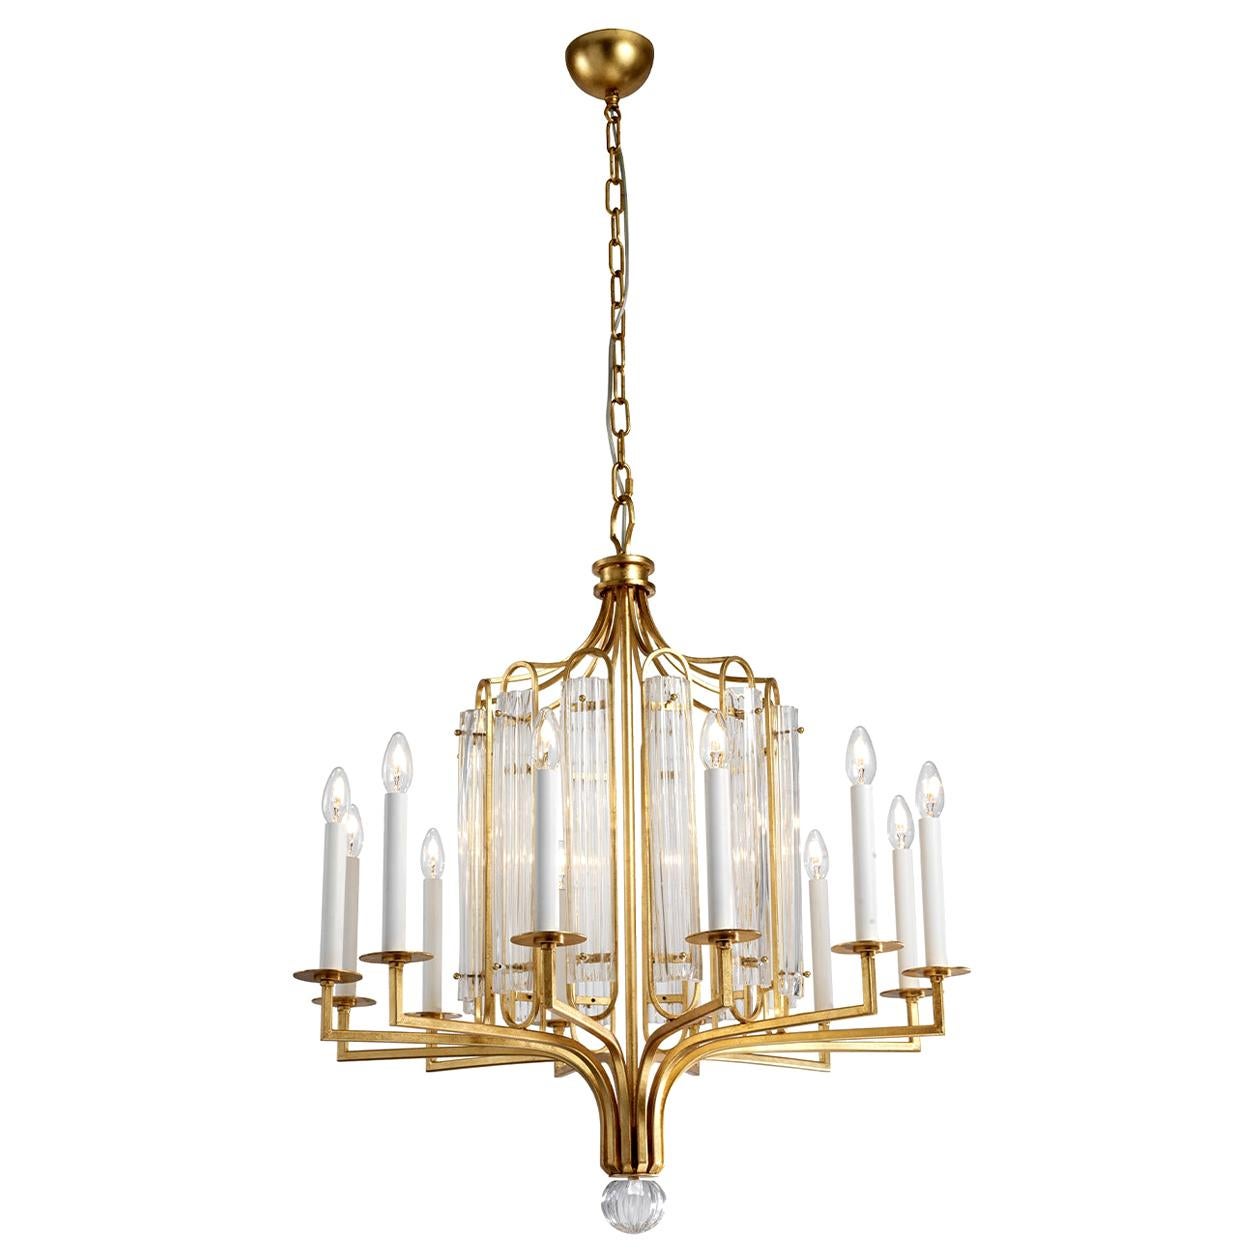 20615 Chandelier For Sale